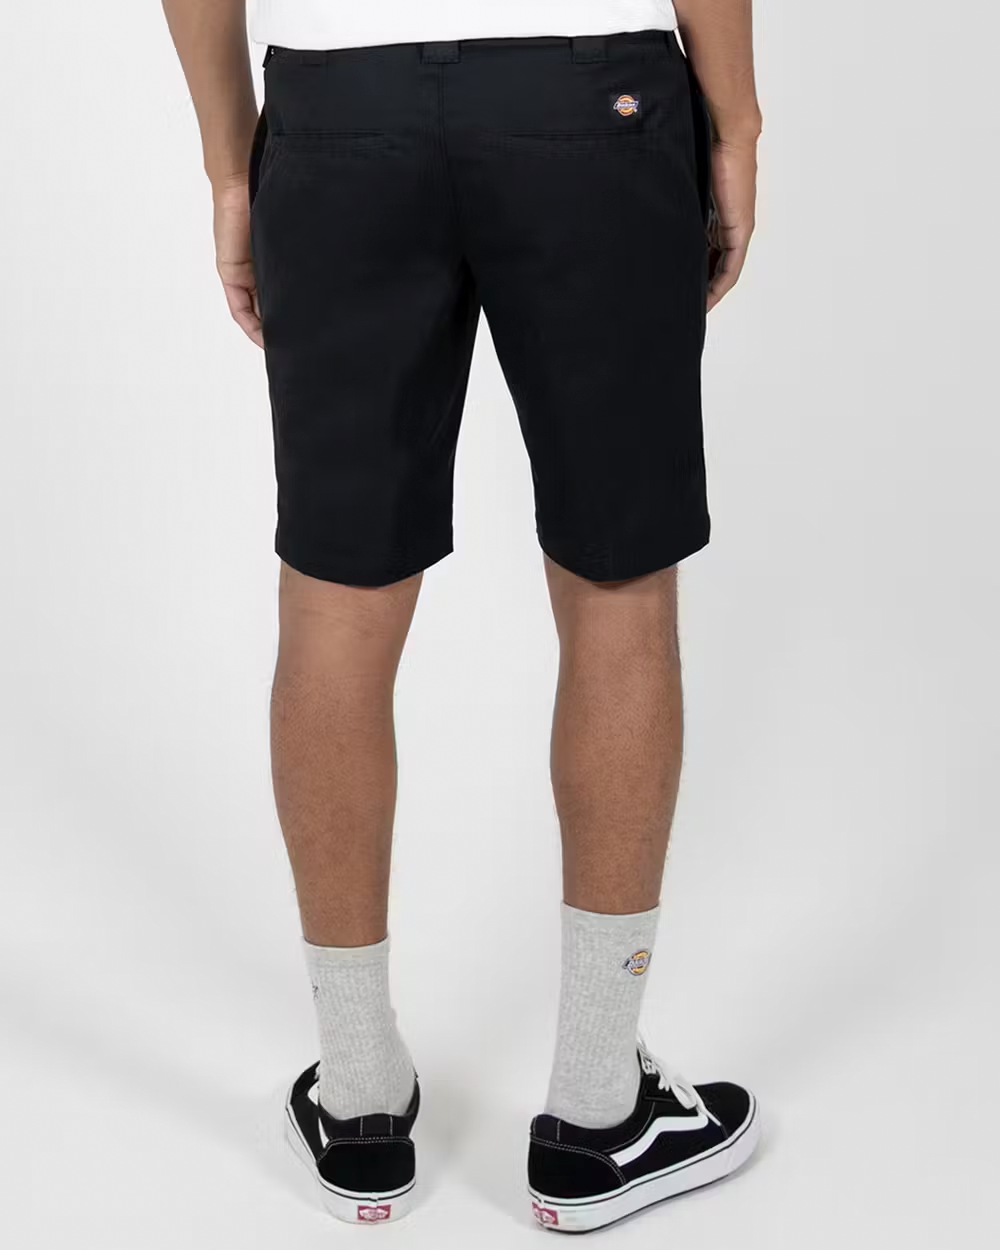 DICKIES 852 Relaxed Fit 11 Work Shorts - Black - VENUE.